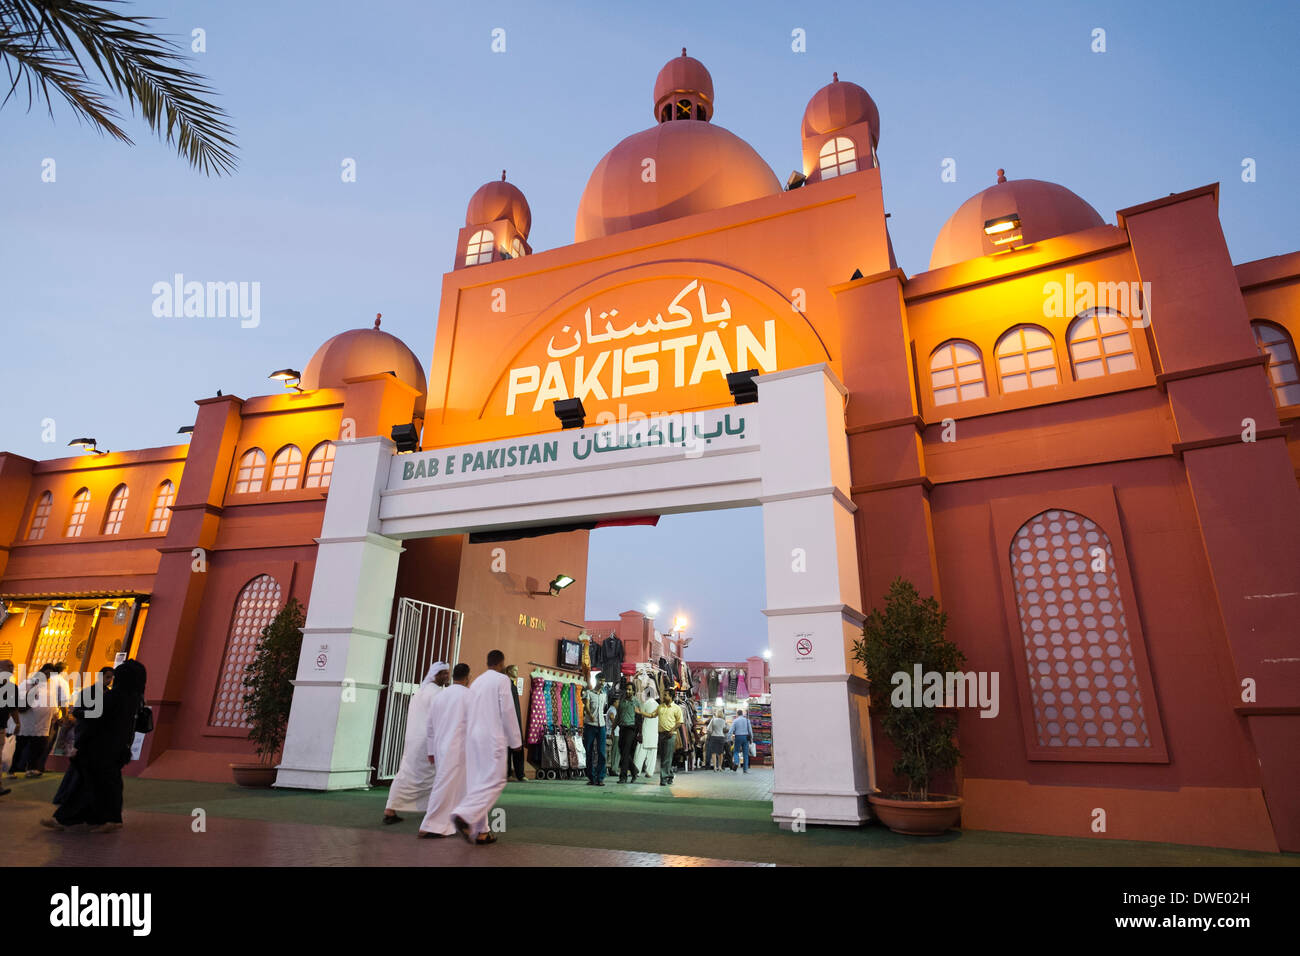 Entrance to Pakistan Pavilion at Global Village tourist cultural attraction in Dubai United Arab Emirates Stock Photo